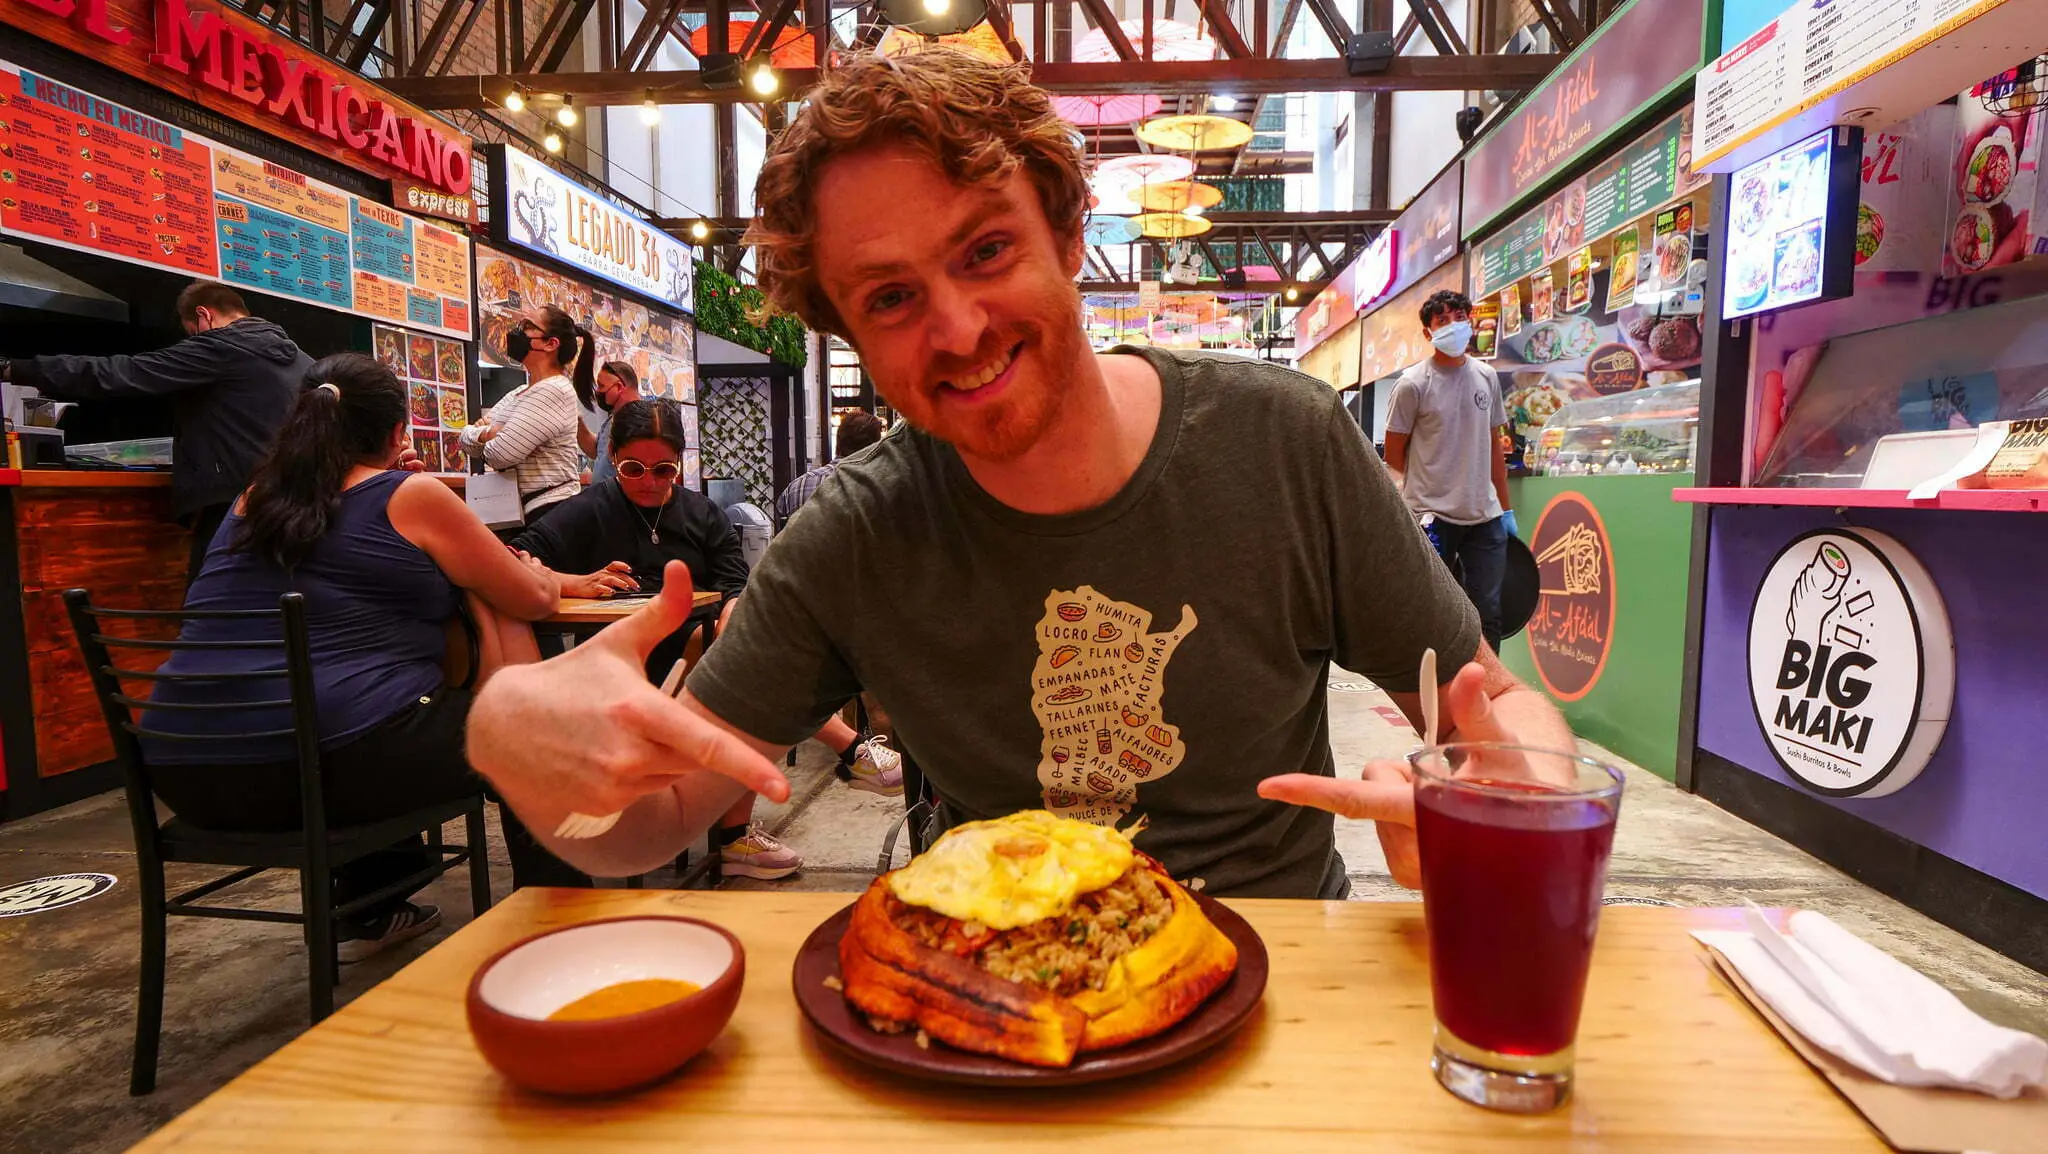 Nomadic Samuel eating Amazon inspired Peruvian cuisine in Lima, Peru for lunch